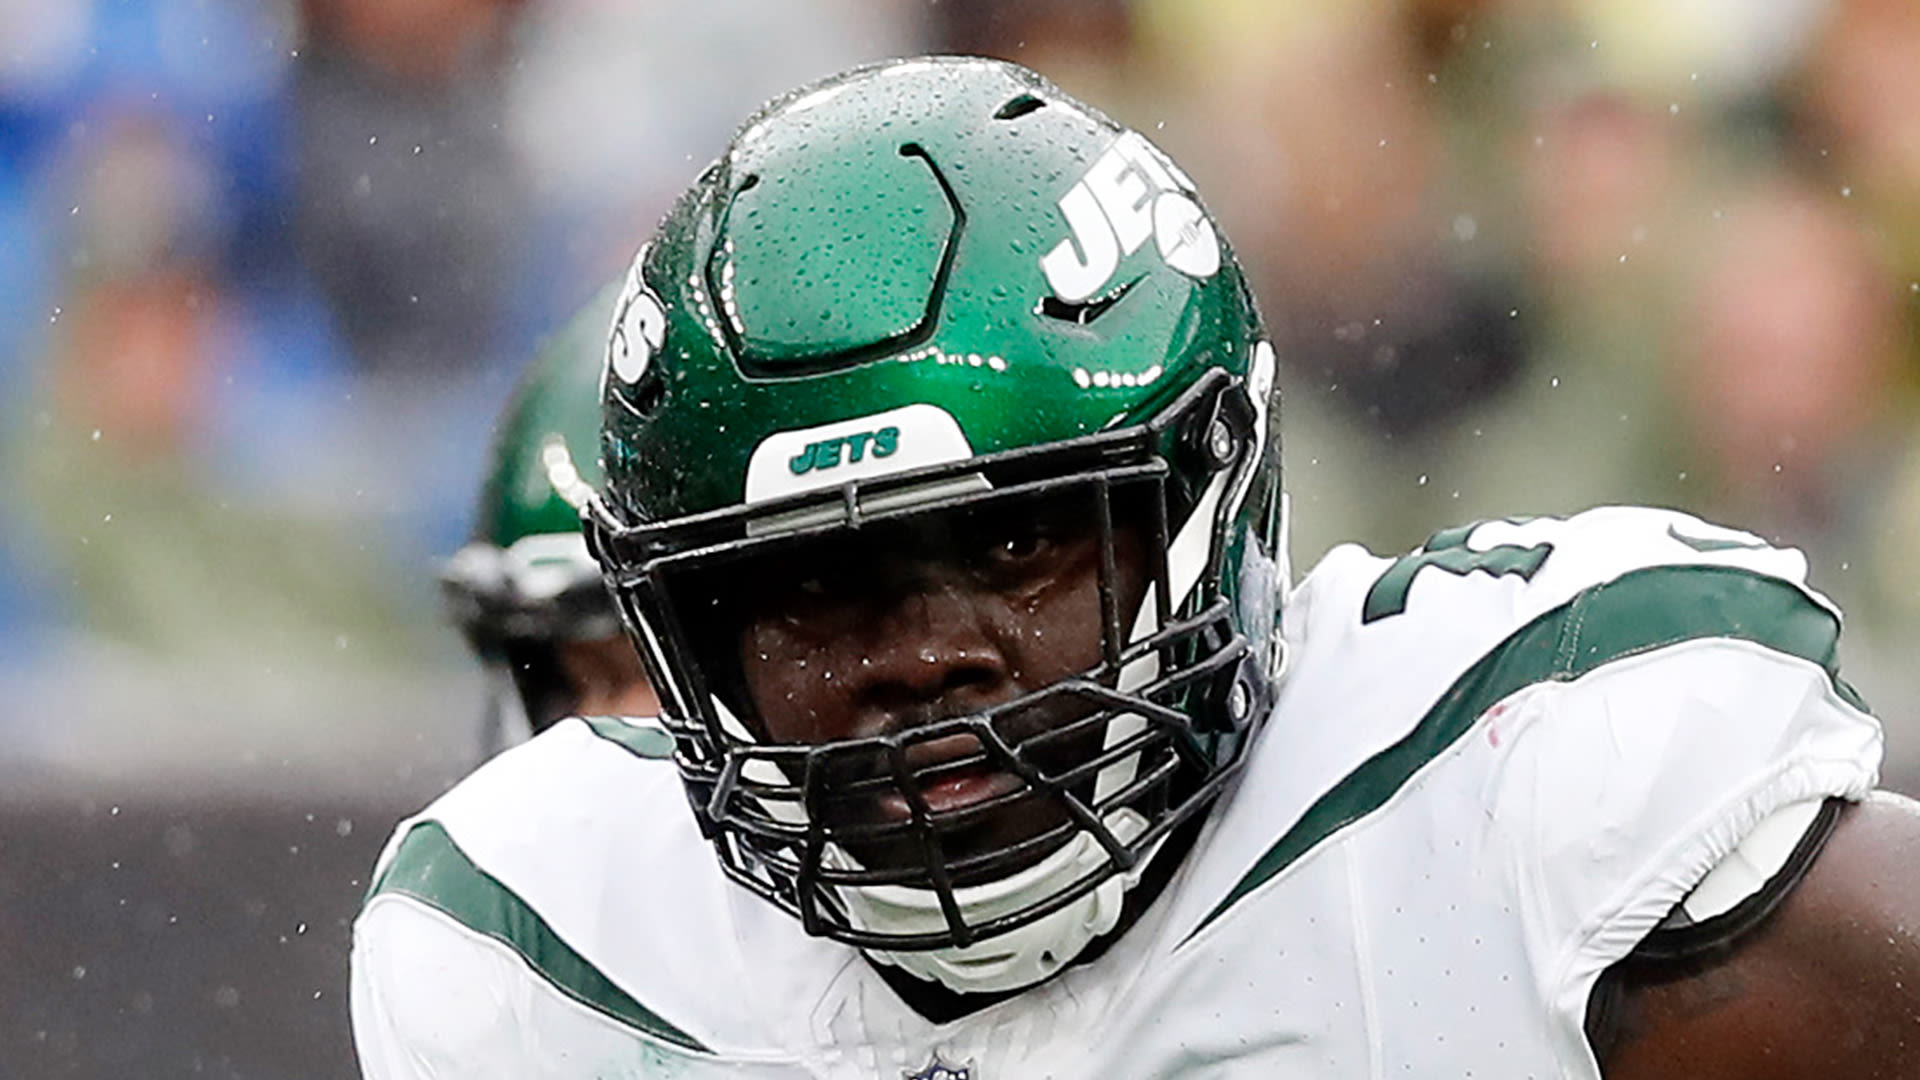 Former Jets star and 1st-round pick set to sign 1-year, $5.5m deal with new team